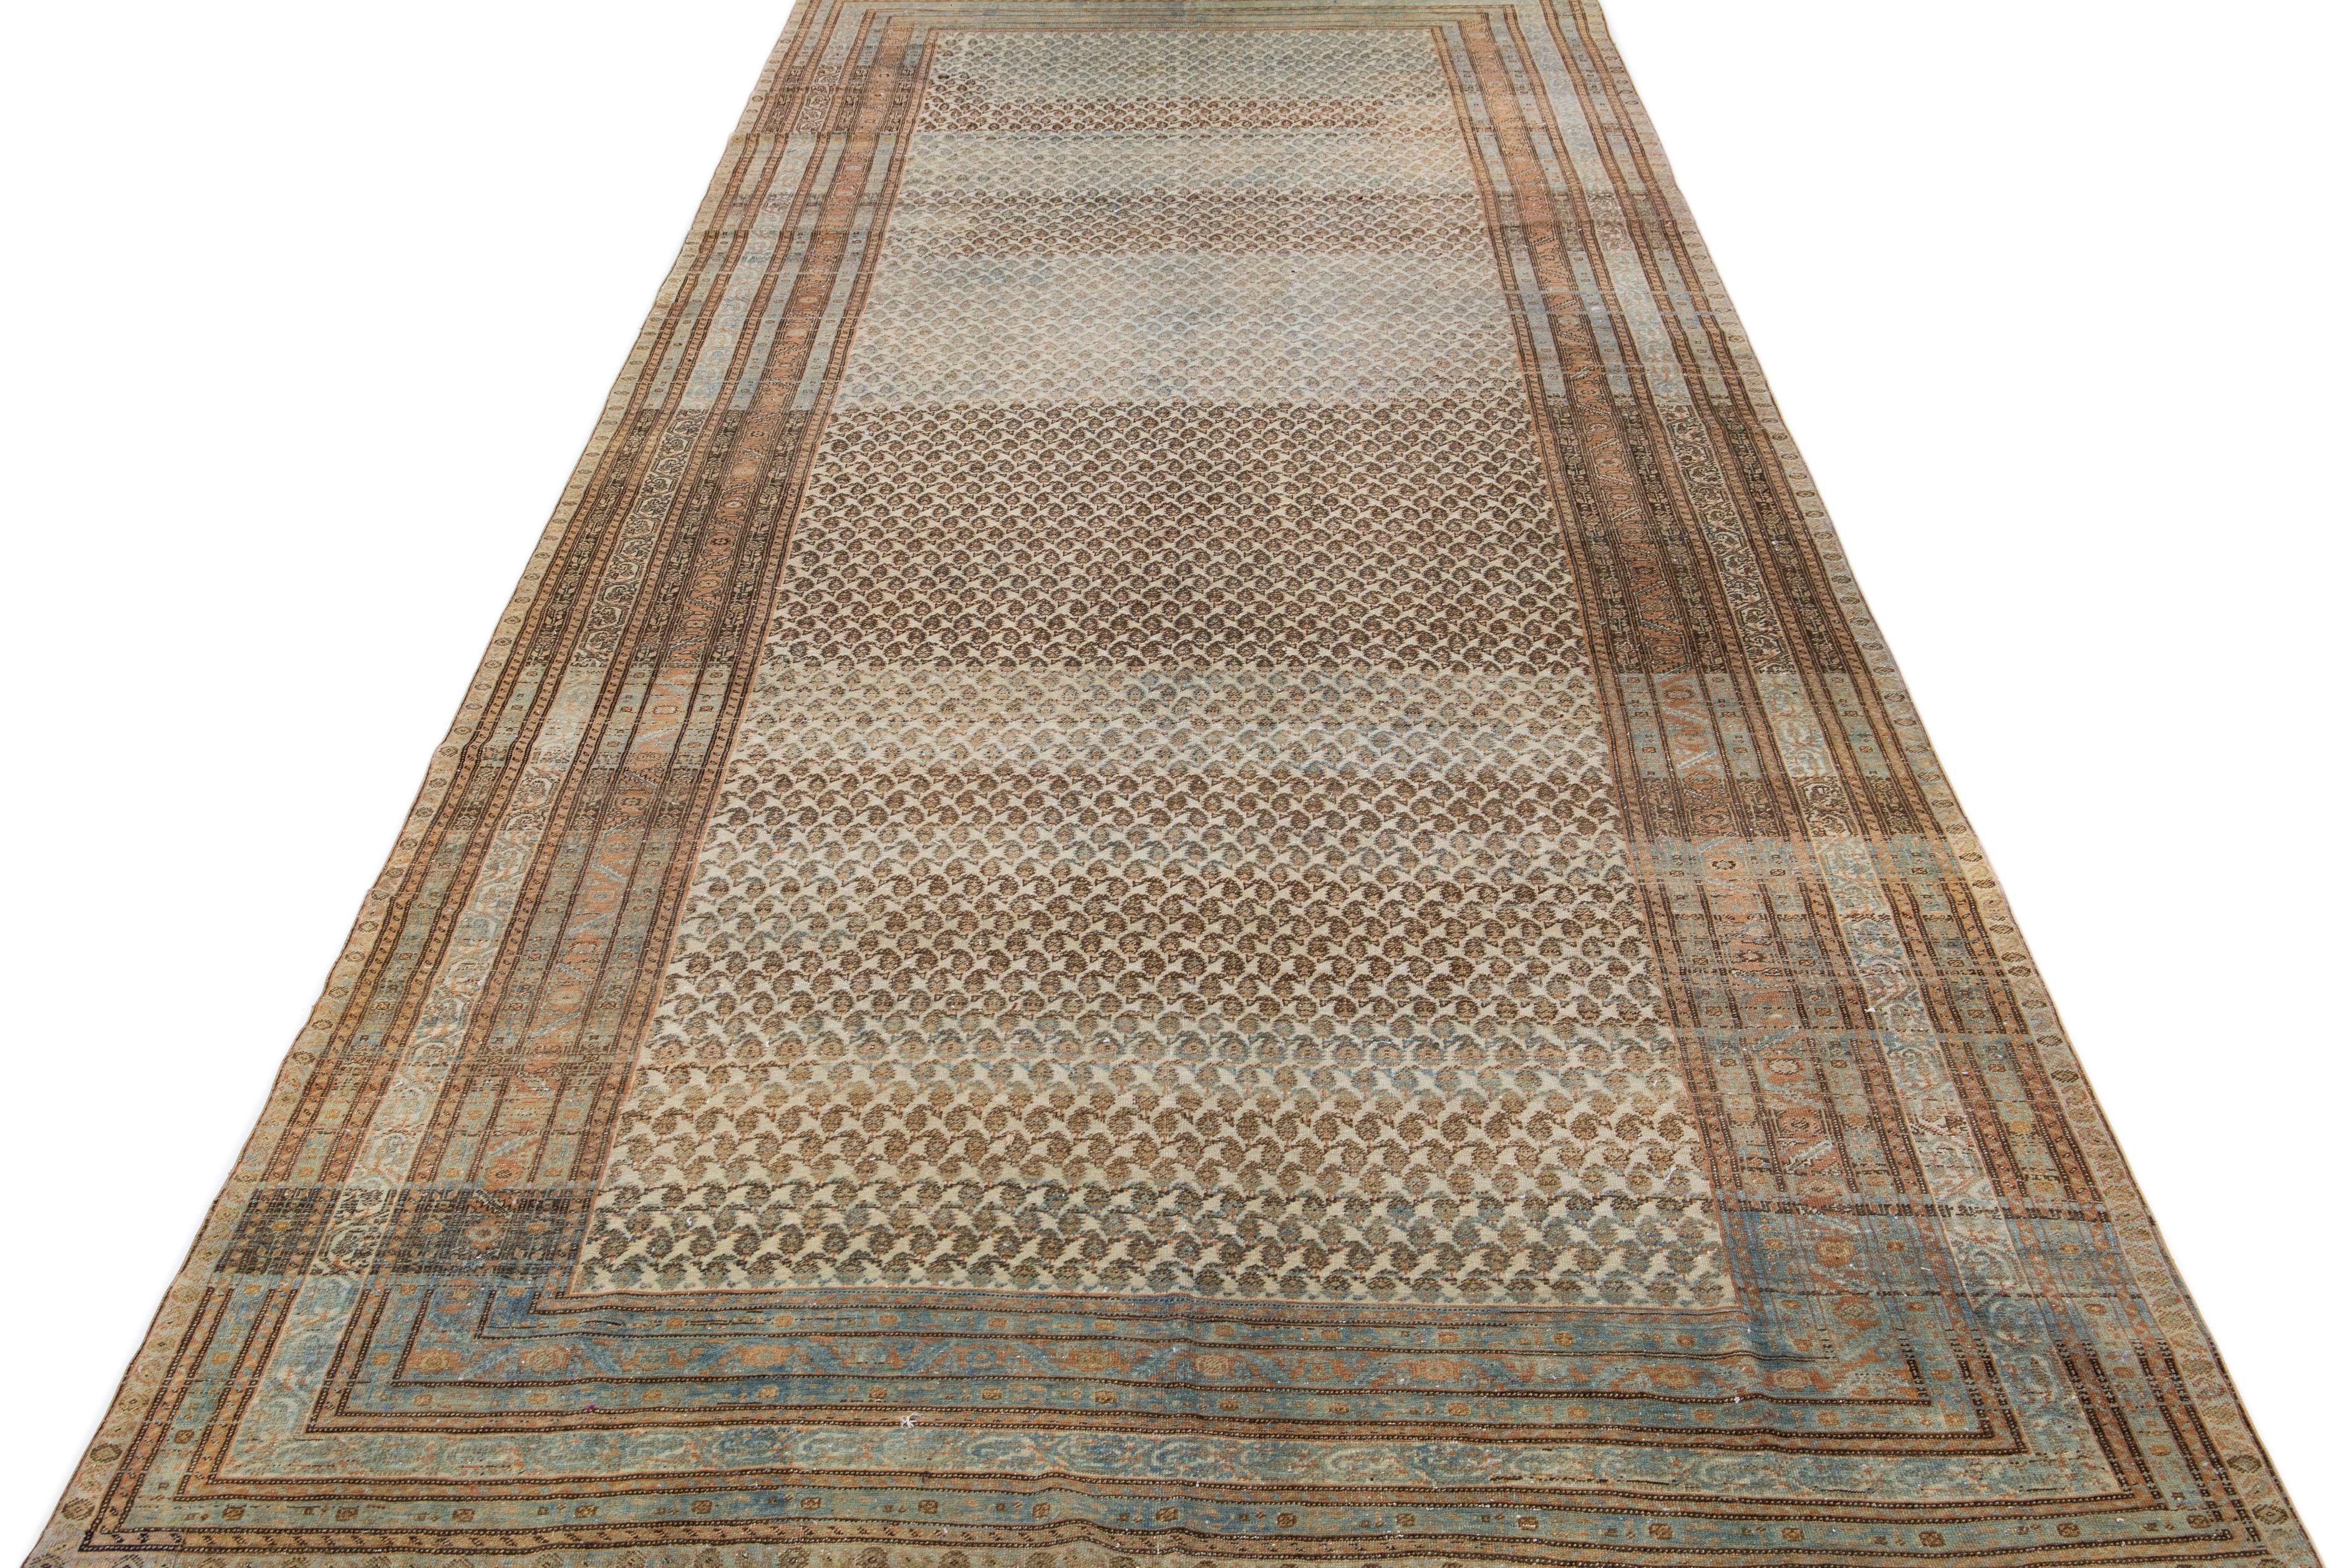 Beautiful antique Malayer hand-knotted wool rug with a beige color field. This Persian rug has brown, blue, and rust accents in a gorgeous traditional floral design.

This rug measures: 7' 4